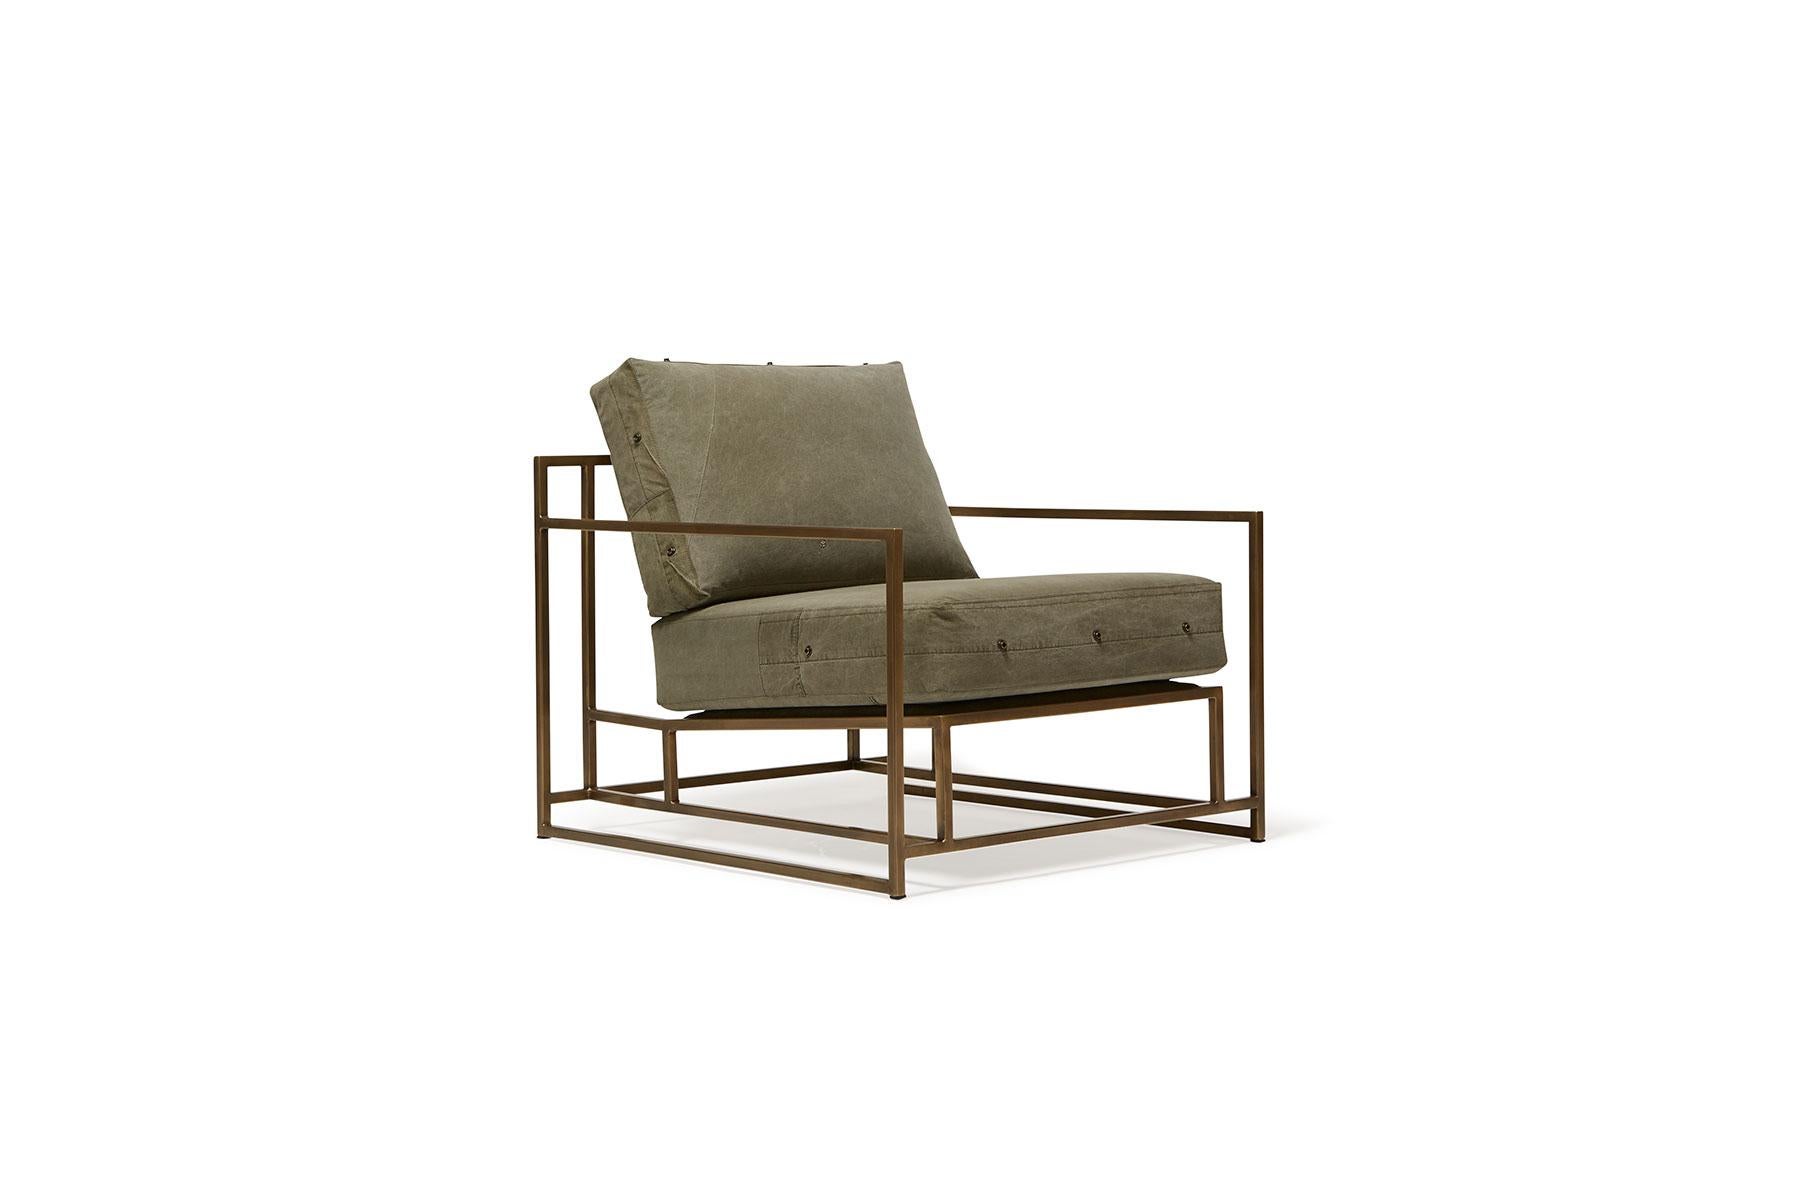 The Inheritance Armchair is as refined as it is comfortable.
 
Since first designing Inheritance collection, Stephen Kenn has been inspired by the inherent history in vintage military-issue materials. Each piece of vintage olive green military